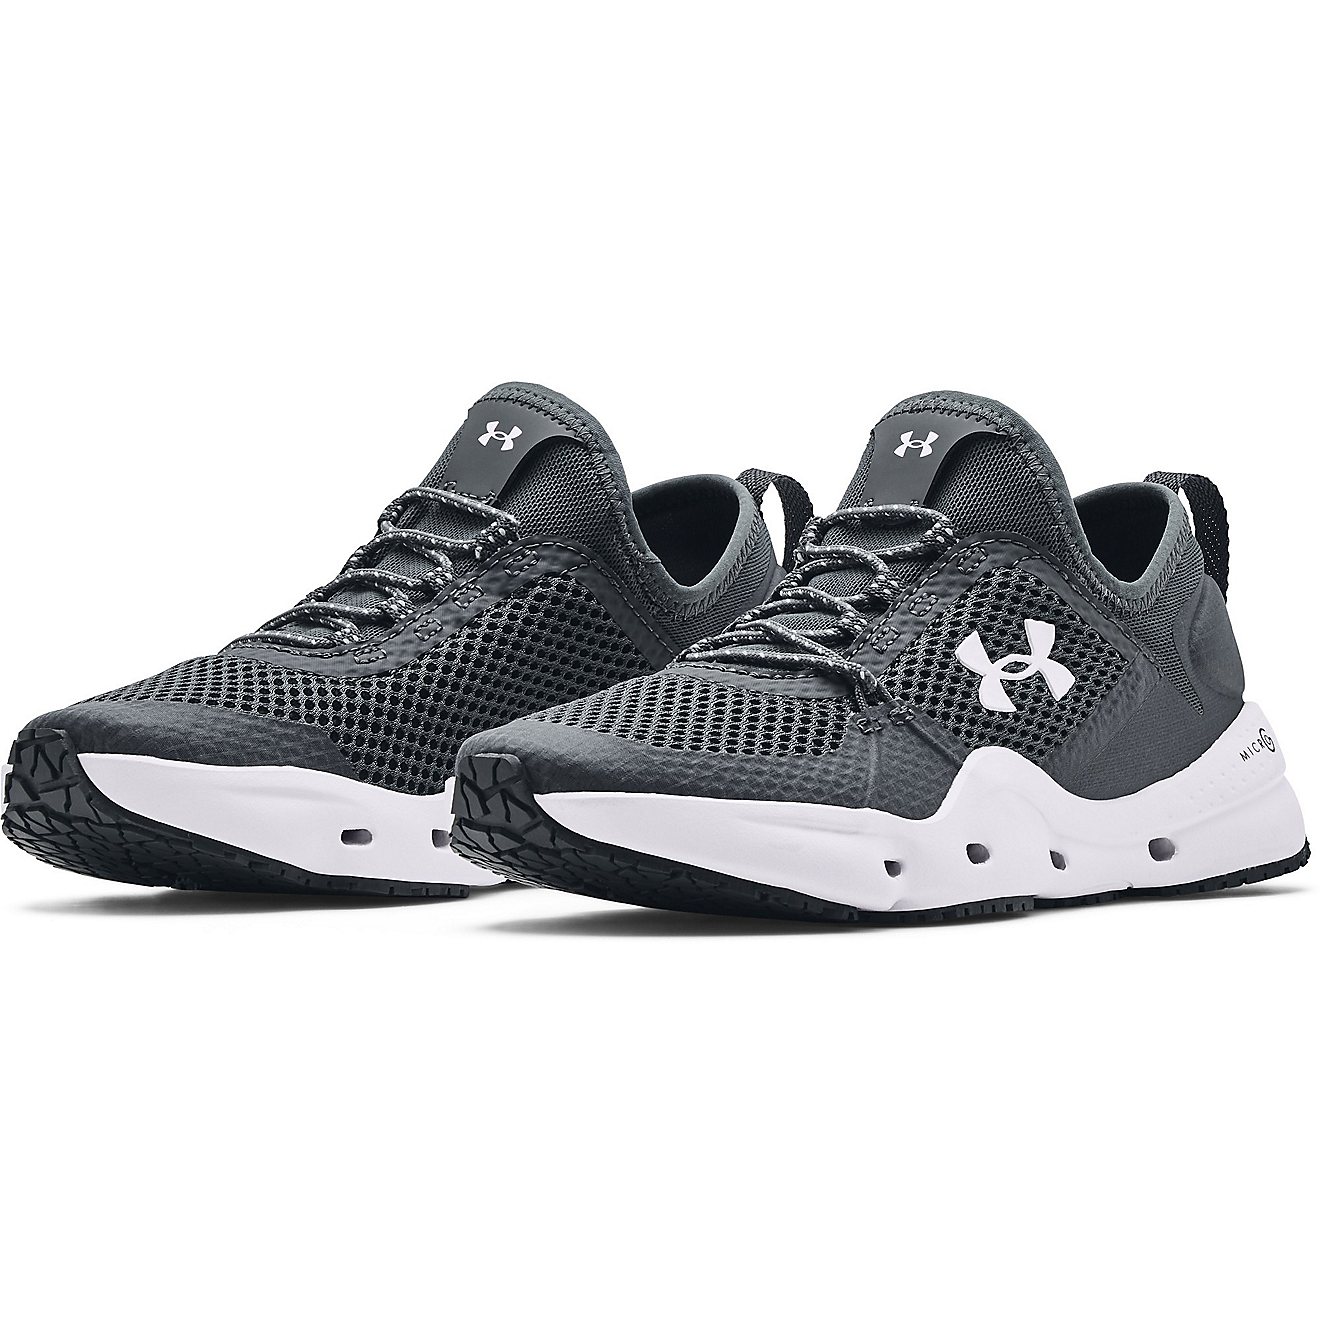 Under Armour Women's UA Micro G Kilchis Fishing Shoes                                                                            - view number 3